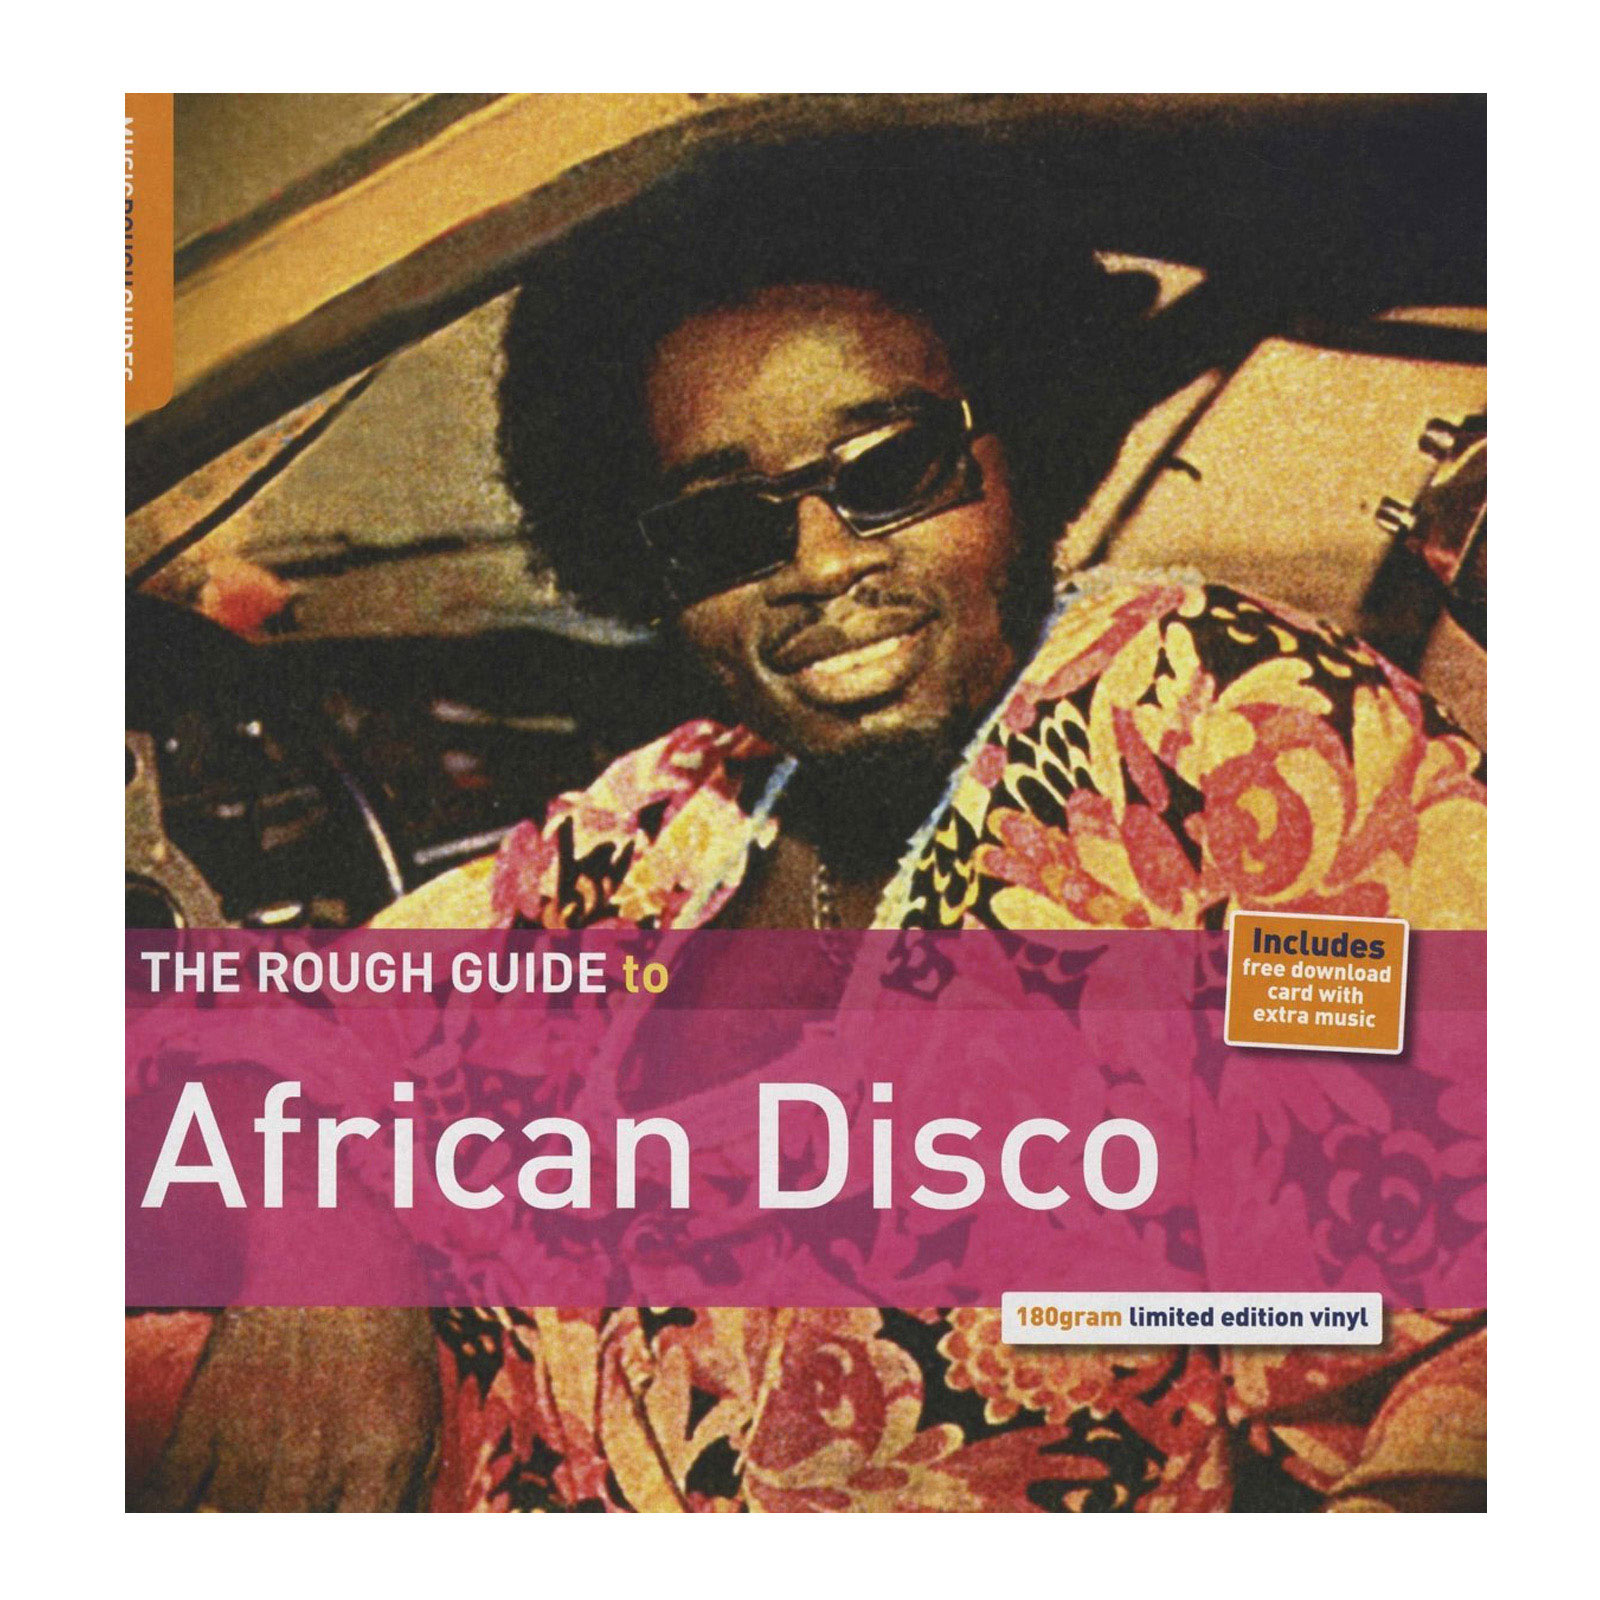 The Rough Guide to African Disco